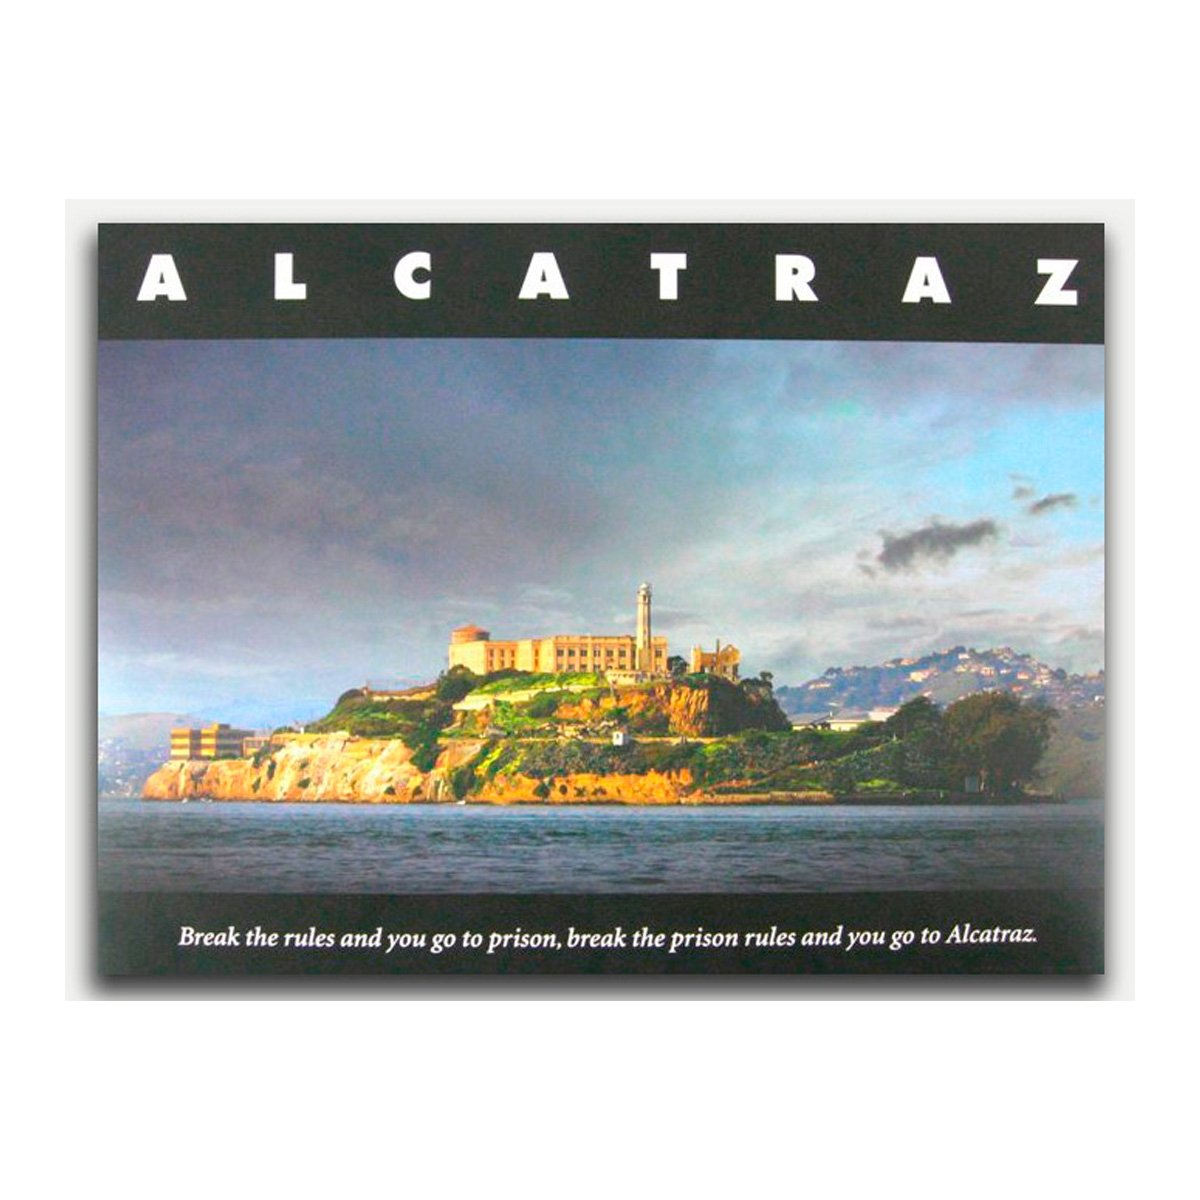 18 x 24 inch poster of Alcatraz Island, featuring dramatic landscape photo of Alcatraz on a cloudy day and text "Alcatraz Break the rules and you go to prison, break the prison rules and you go to Alcatraz" in white on black background. Photograph by Mike Long.